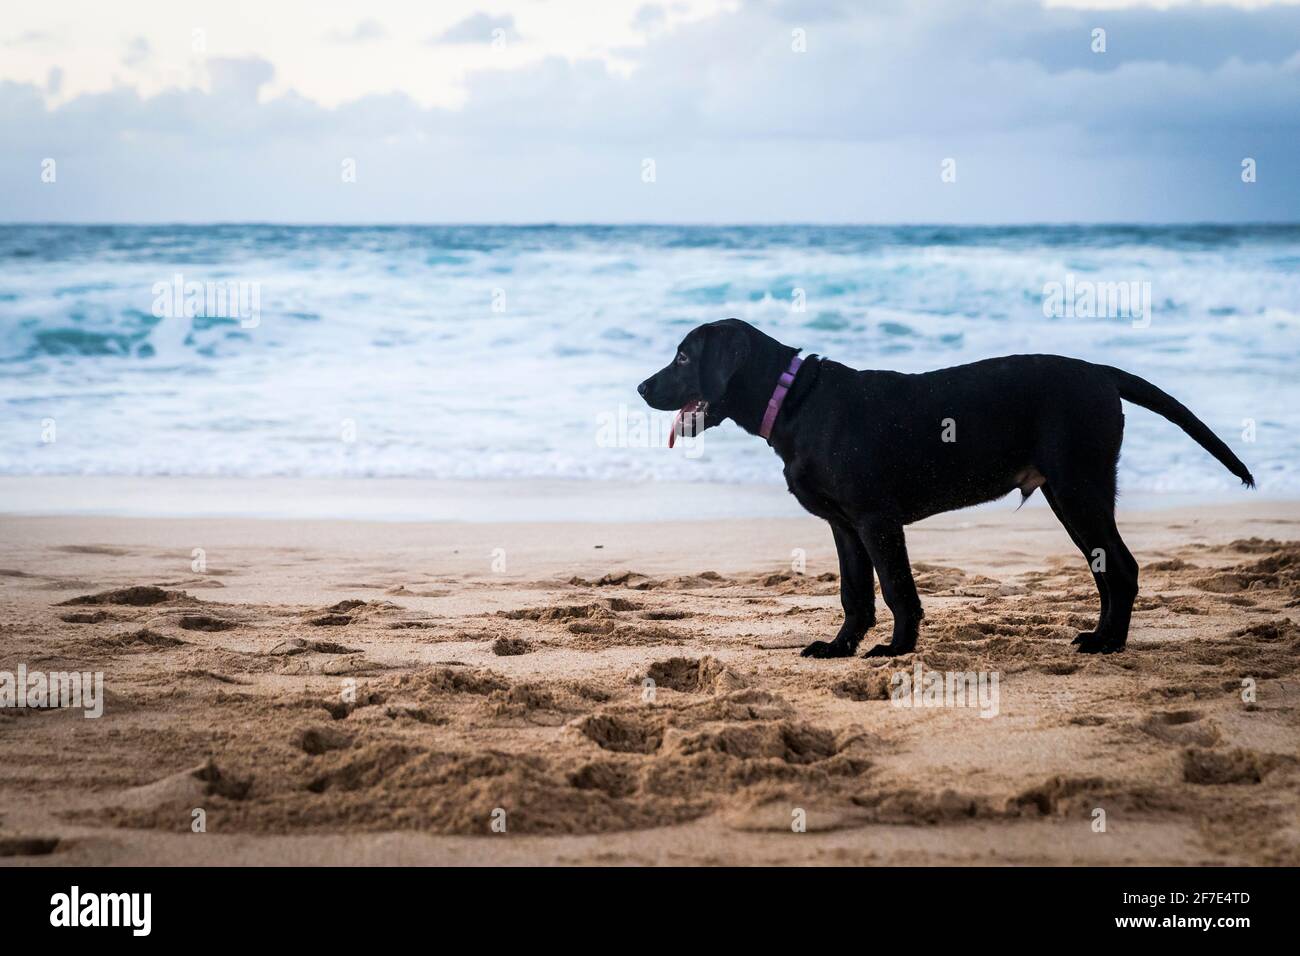 Big brown mature dog standing on a beach in Hawaii Stock Photo